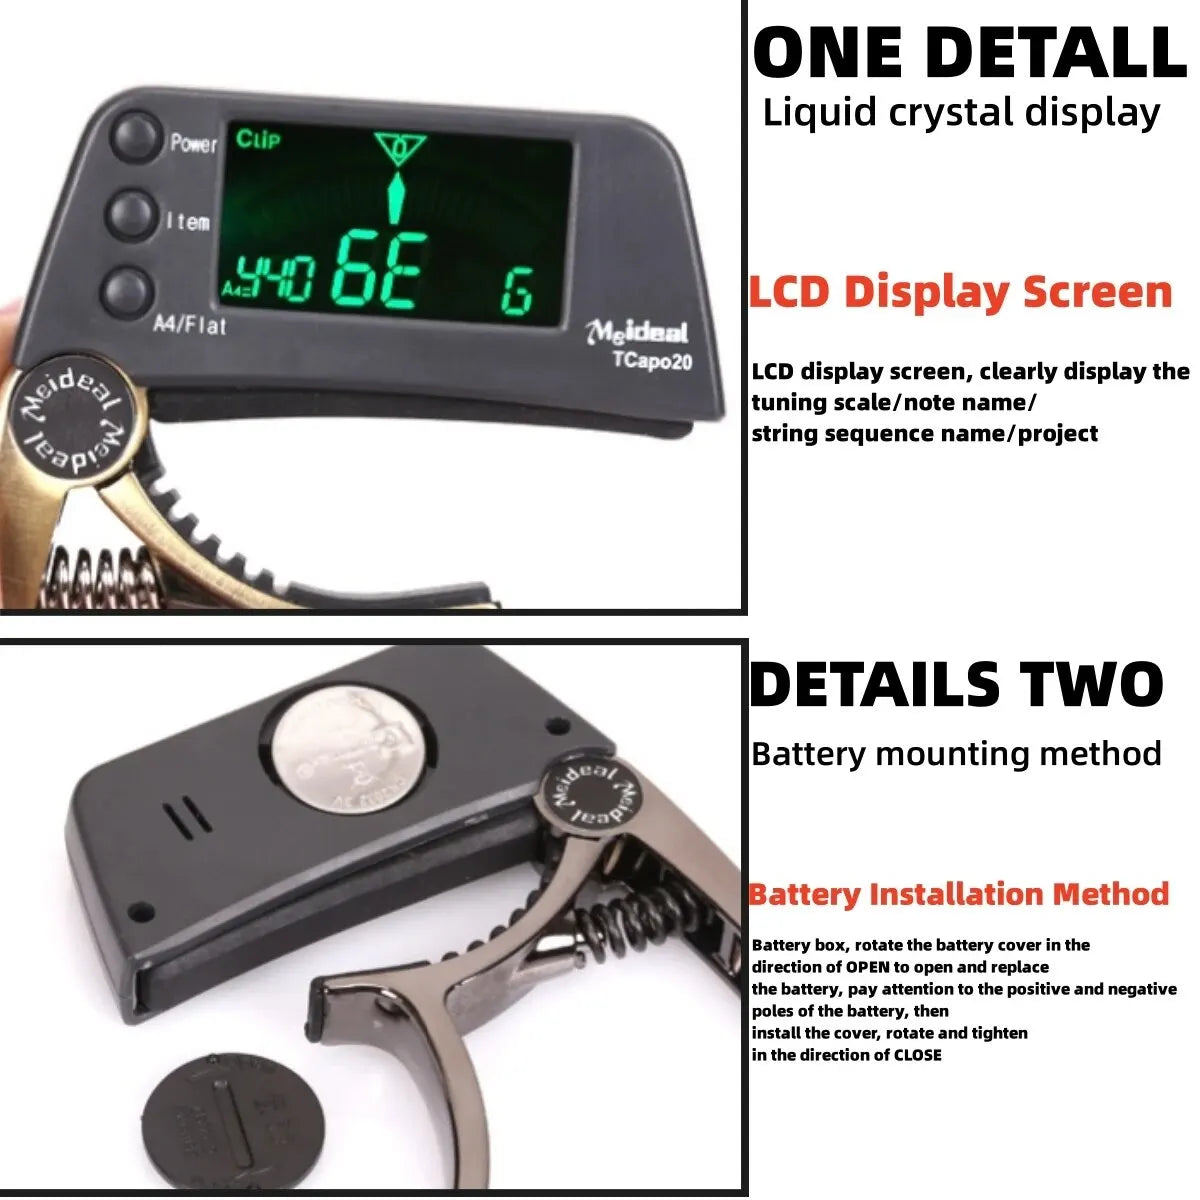 Professional Guitar Tuner & Capo 2 In 1 LED Display for Acoustic Electric Guitars, Bass, Ukelele